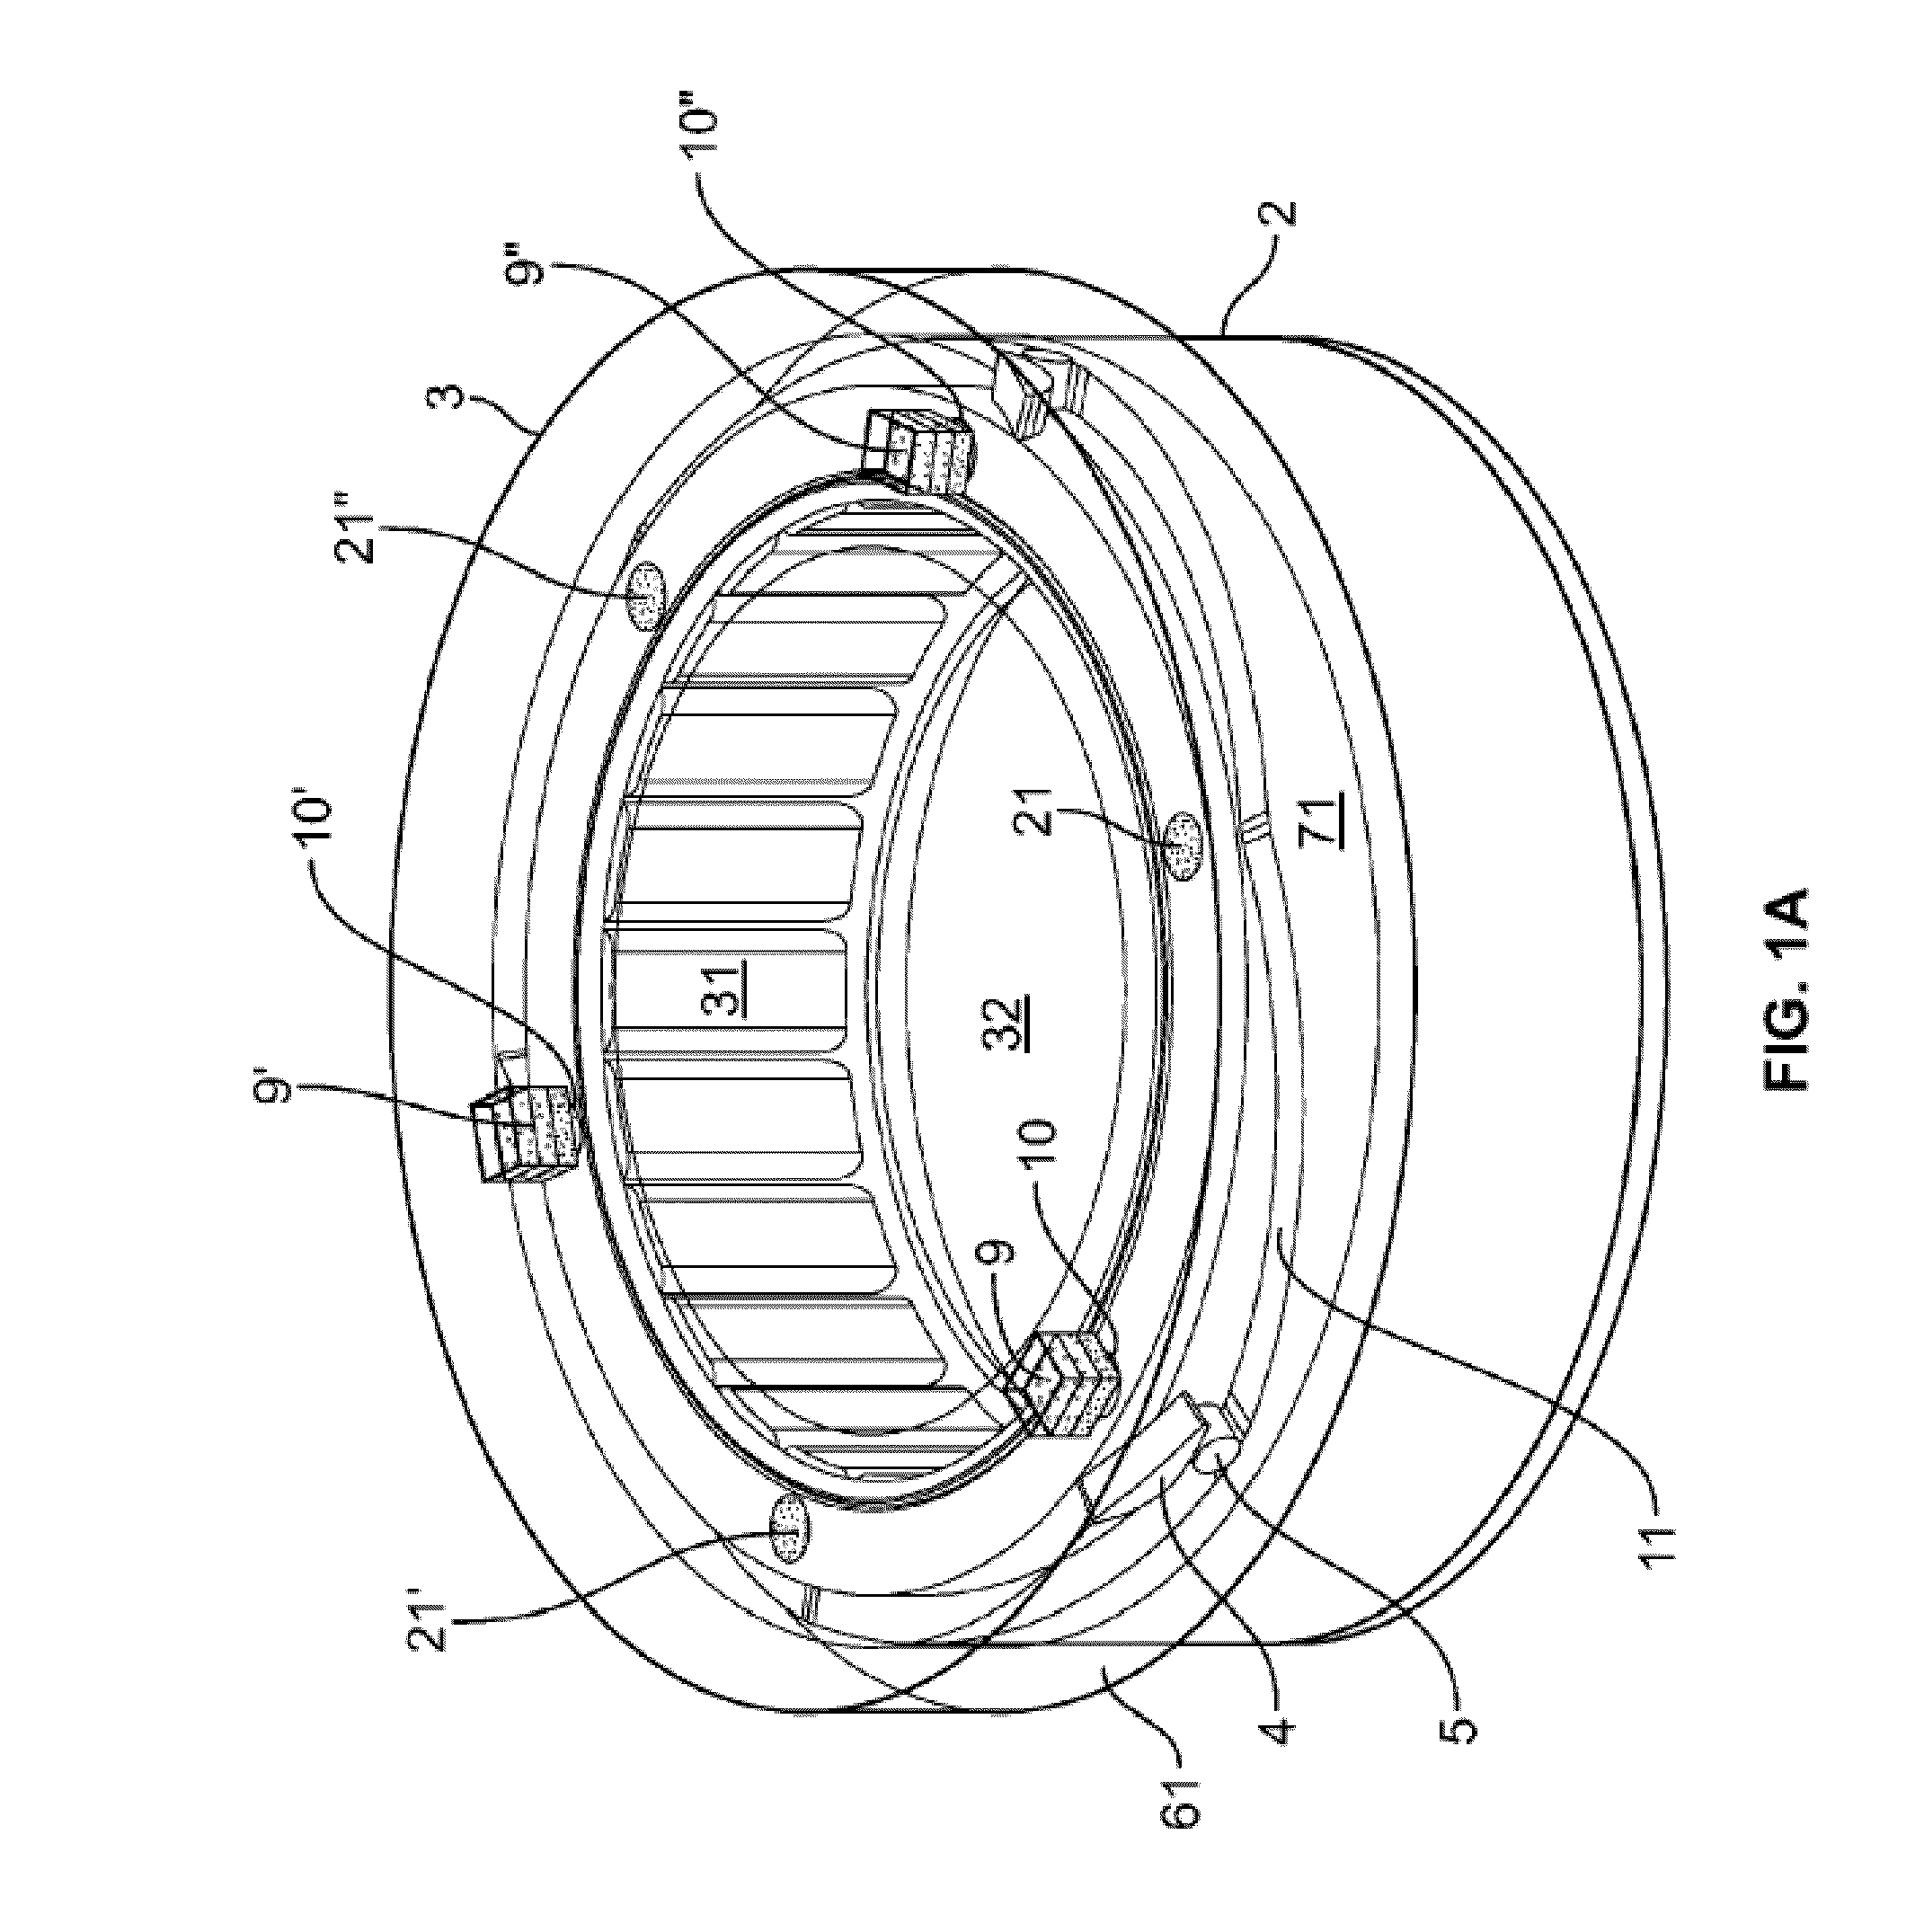 Self-actuating closure mechanisms for closeable articles